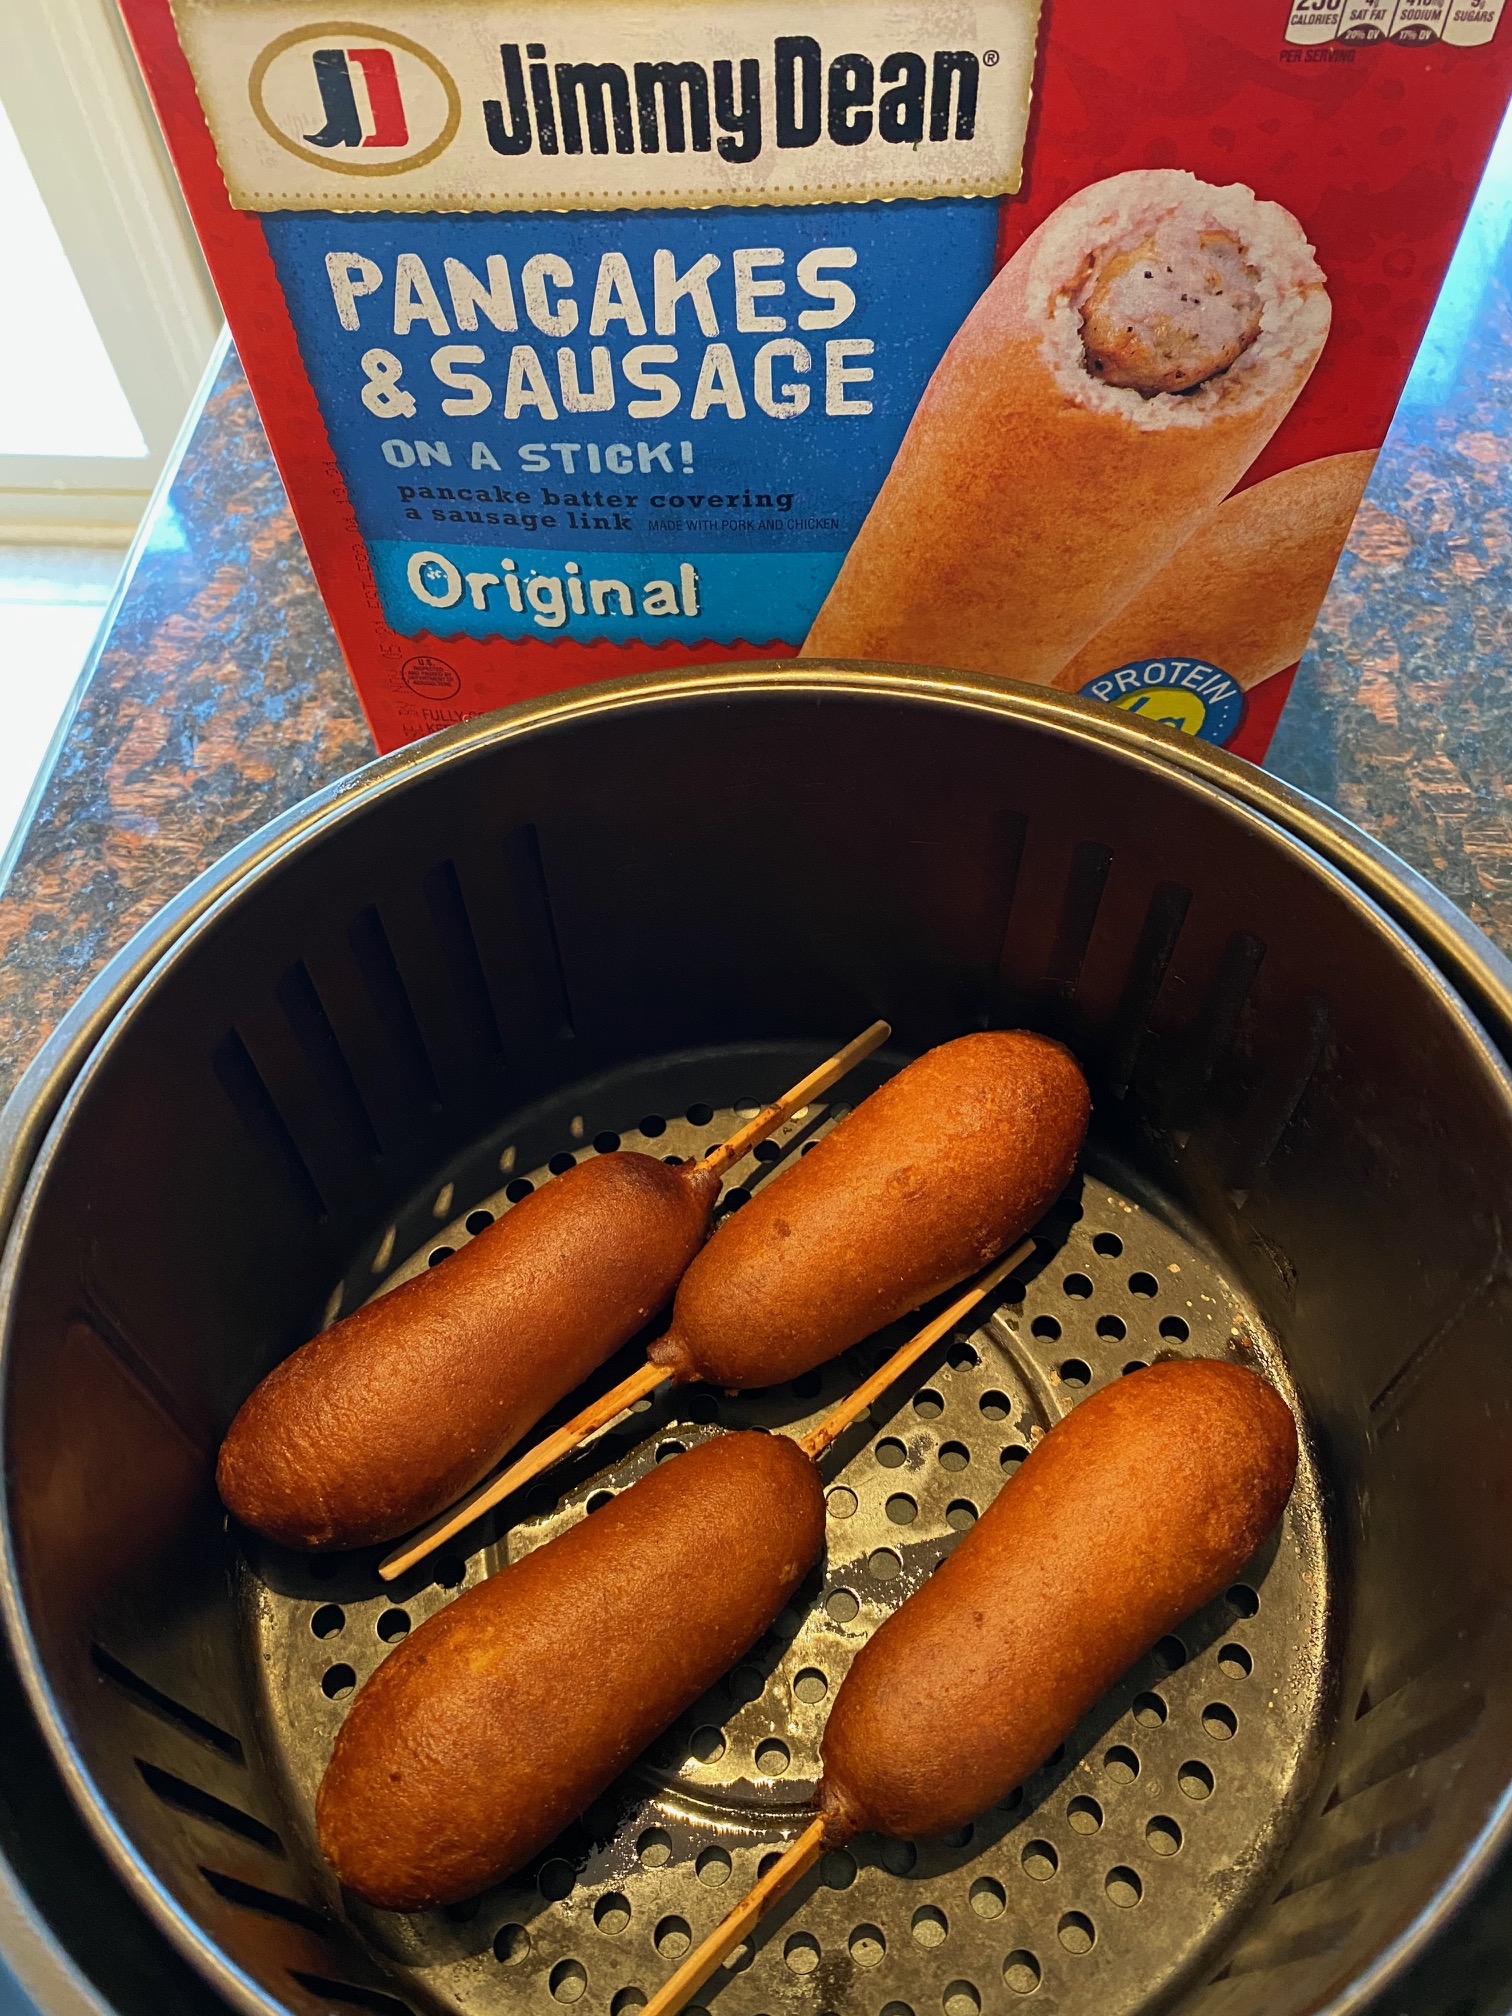 Air Fryer sausages (The Best Ever) - The Dinner Bite